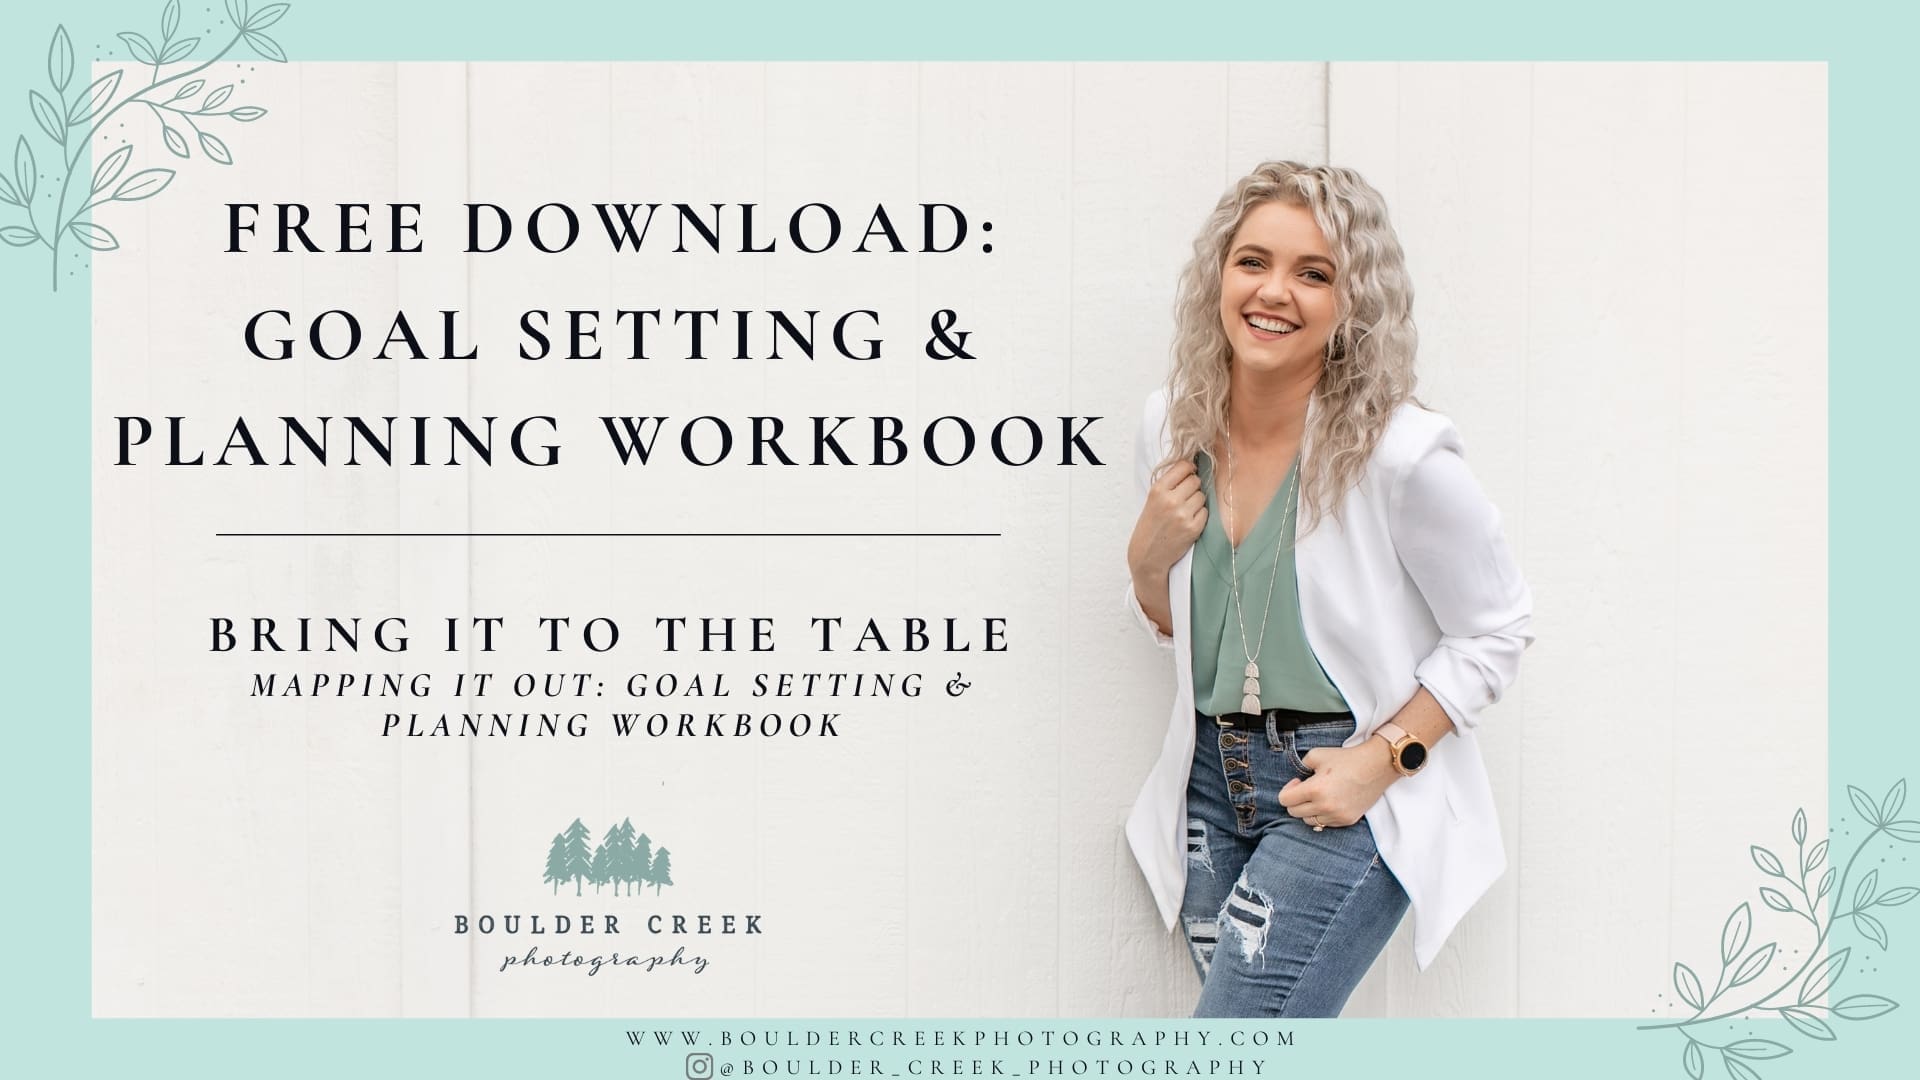 free business download, goal setting, goals, goal planning workbook, bring it to the table, boulder creek photography